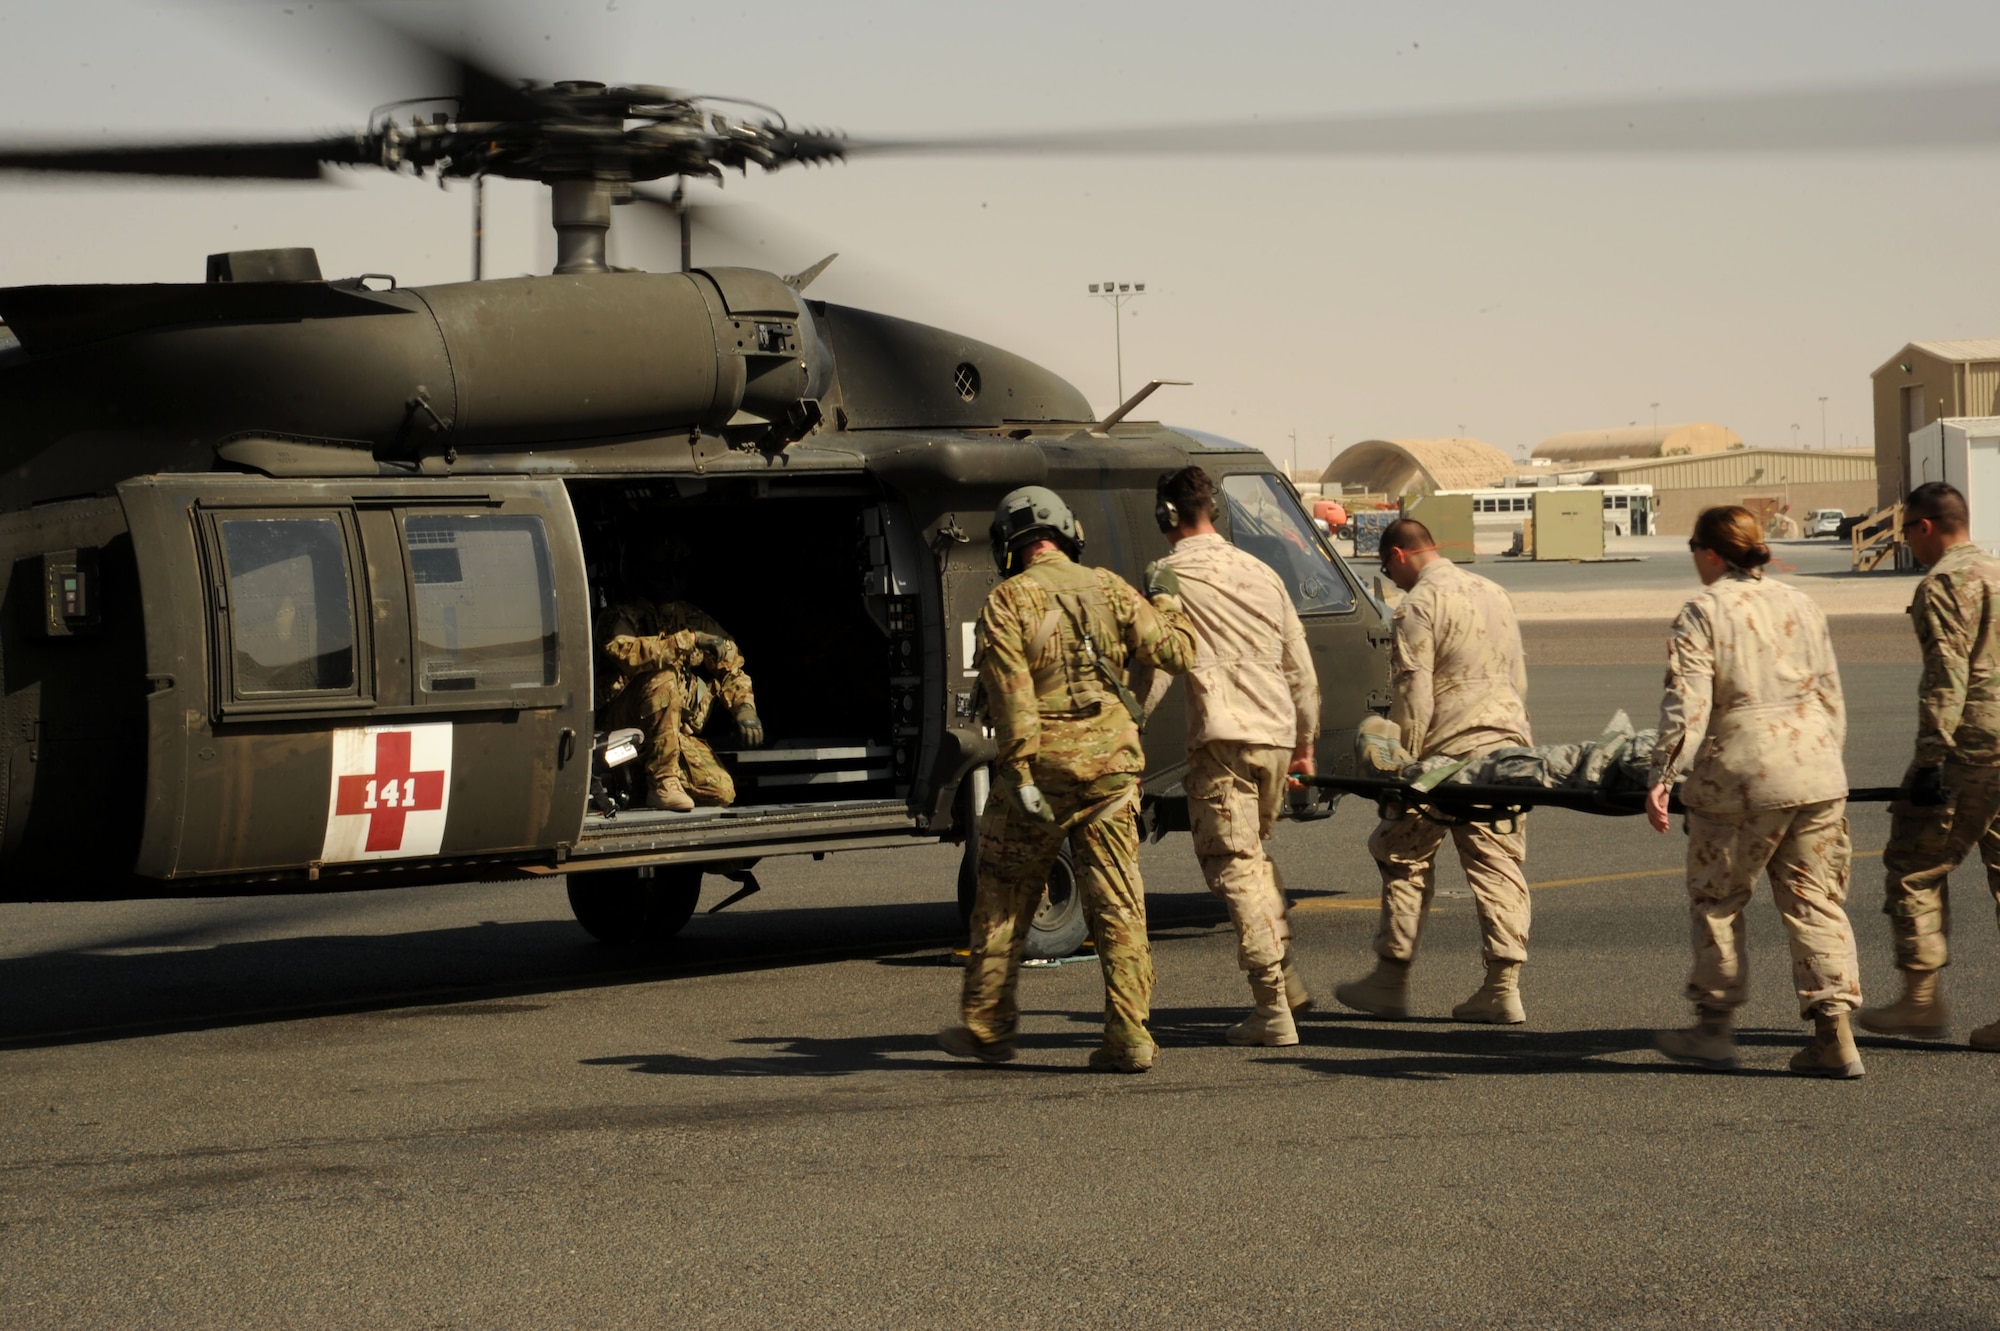 Medical personnel from team Canada and the 386th Expeditionary Medical Group perform a hot load during medical evacuation training Oct. 14, 2016 at an undisclosed location in Southwest Asia. The purpose of the training was to expand mission capabilities and enhance relationships between joint and coalition partners. (U.S. Air Force photo/Senior Airman Zachary Kee)